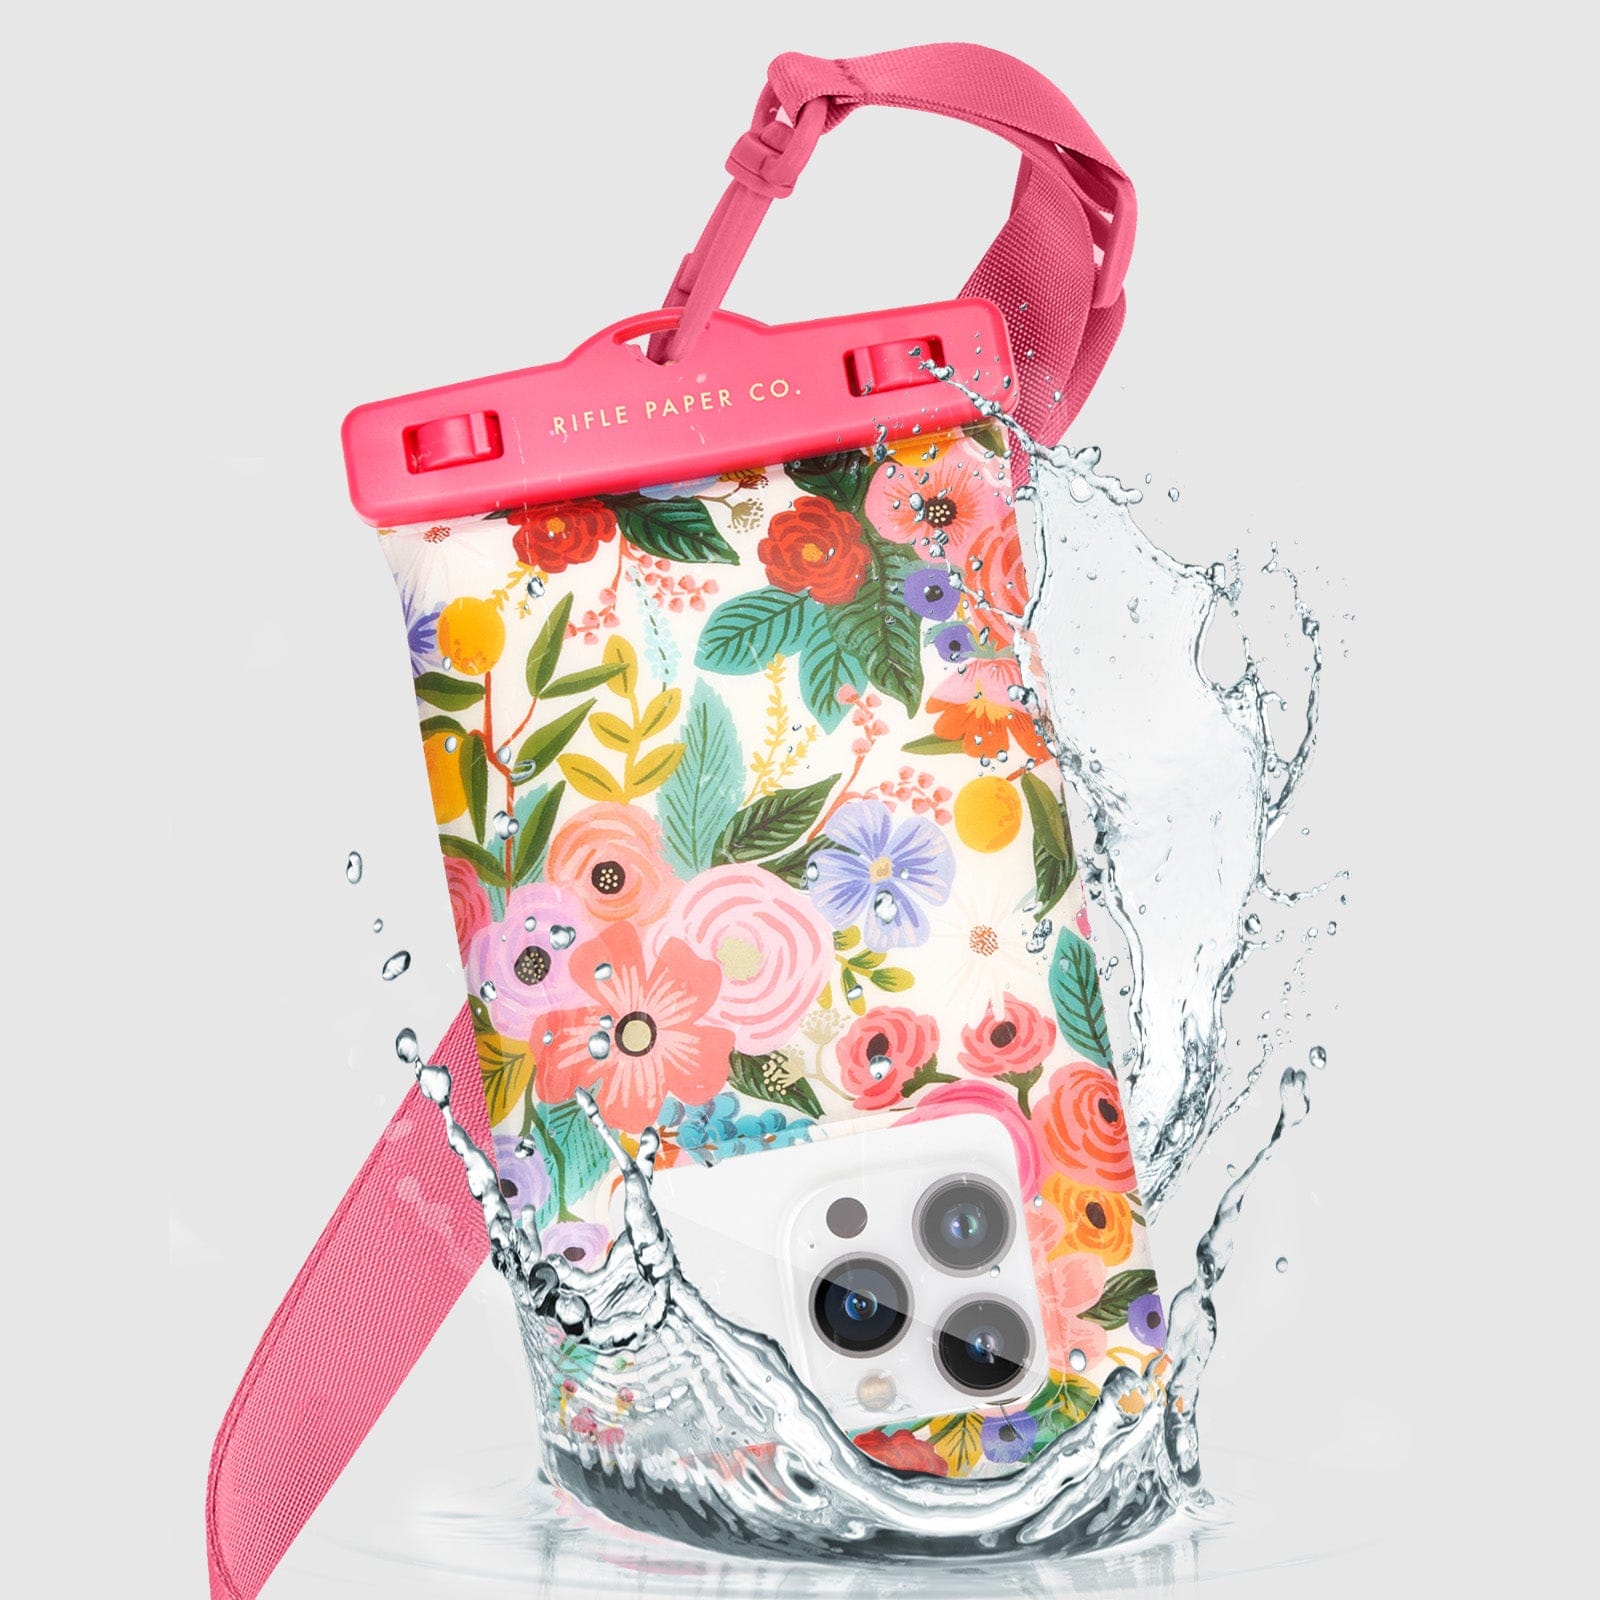 Rifle Paper Co. Waterproof Floating Pouch (Garden Party)